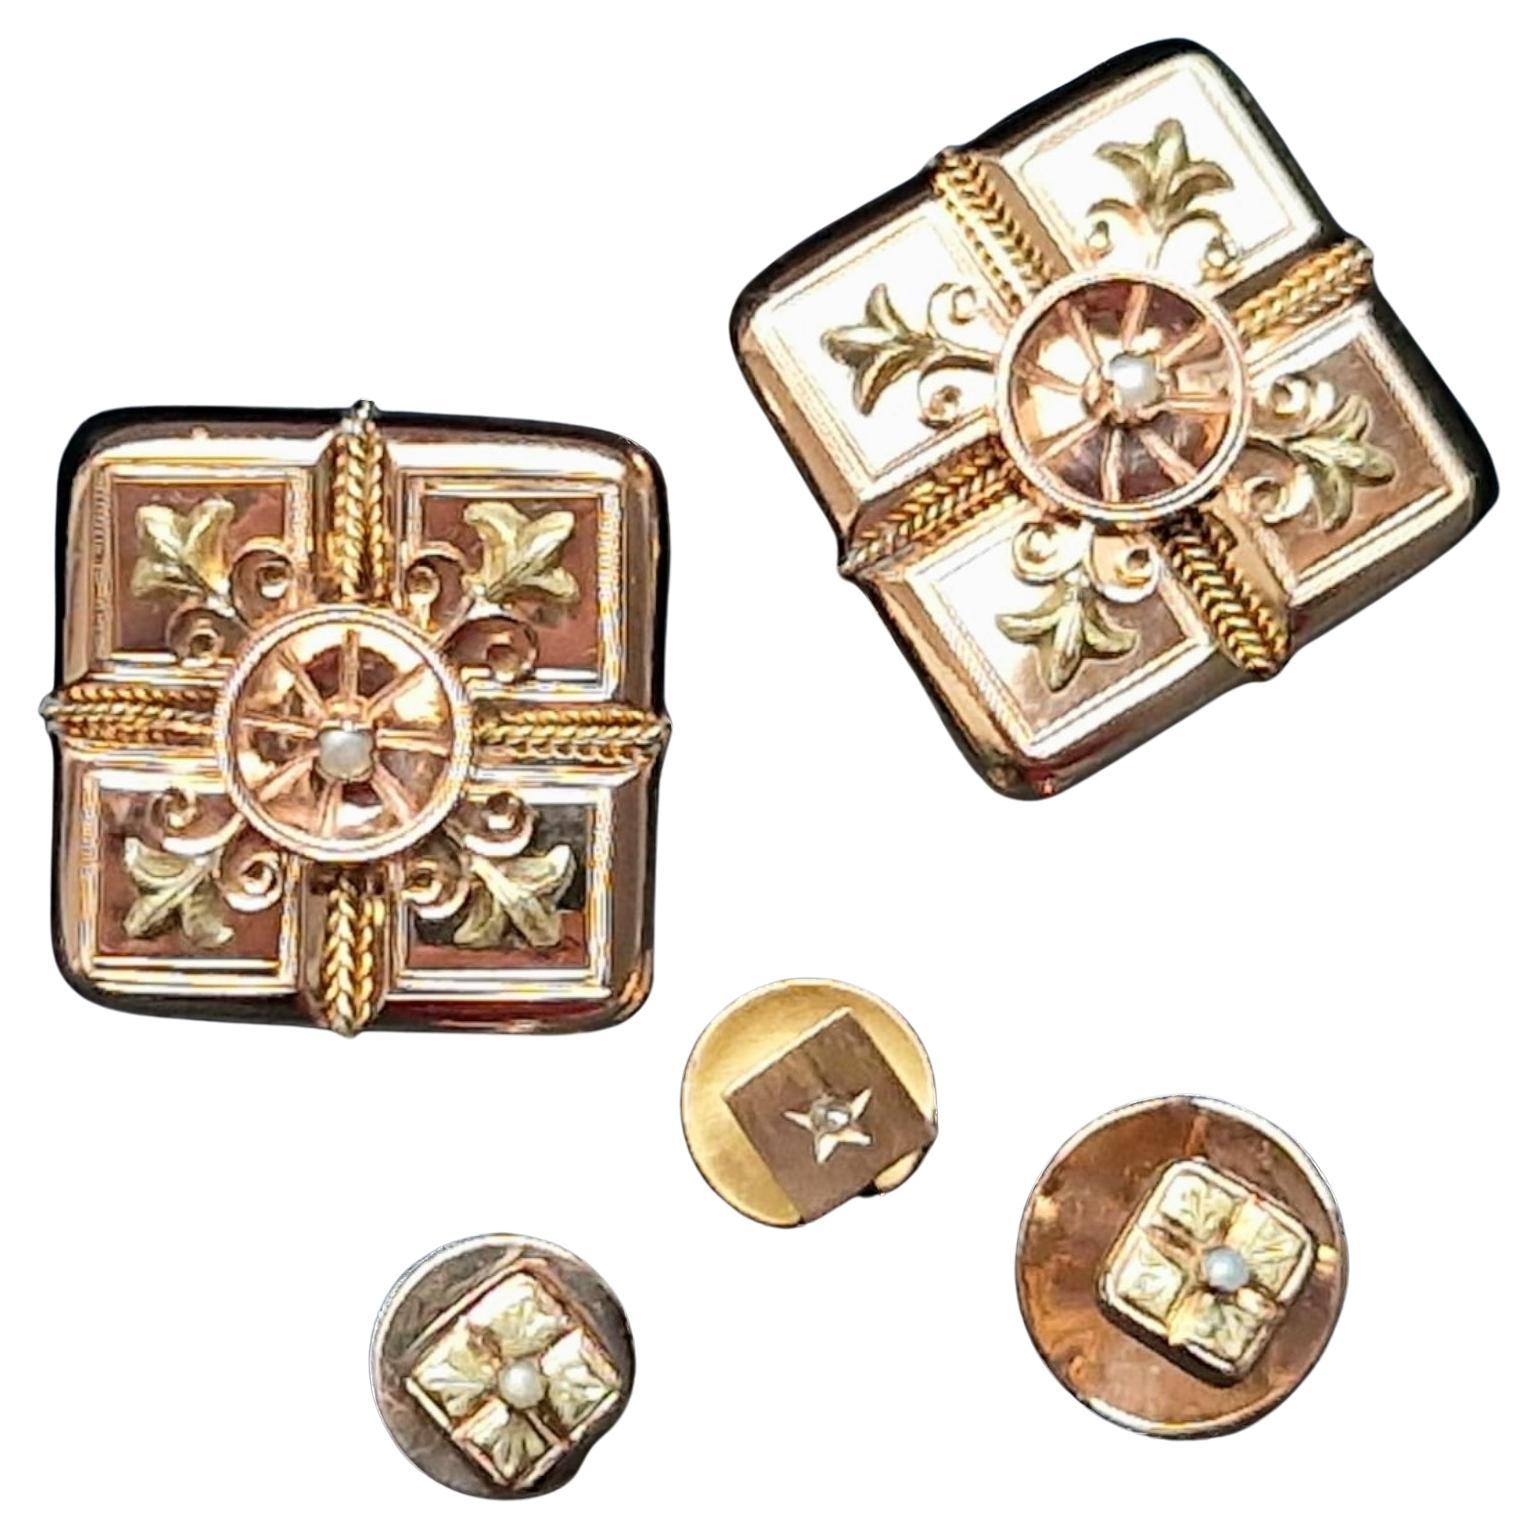 Pair of  Antique French Cufflinks & Studs with Lys Flower design,  19th C (1850) For Sale